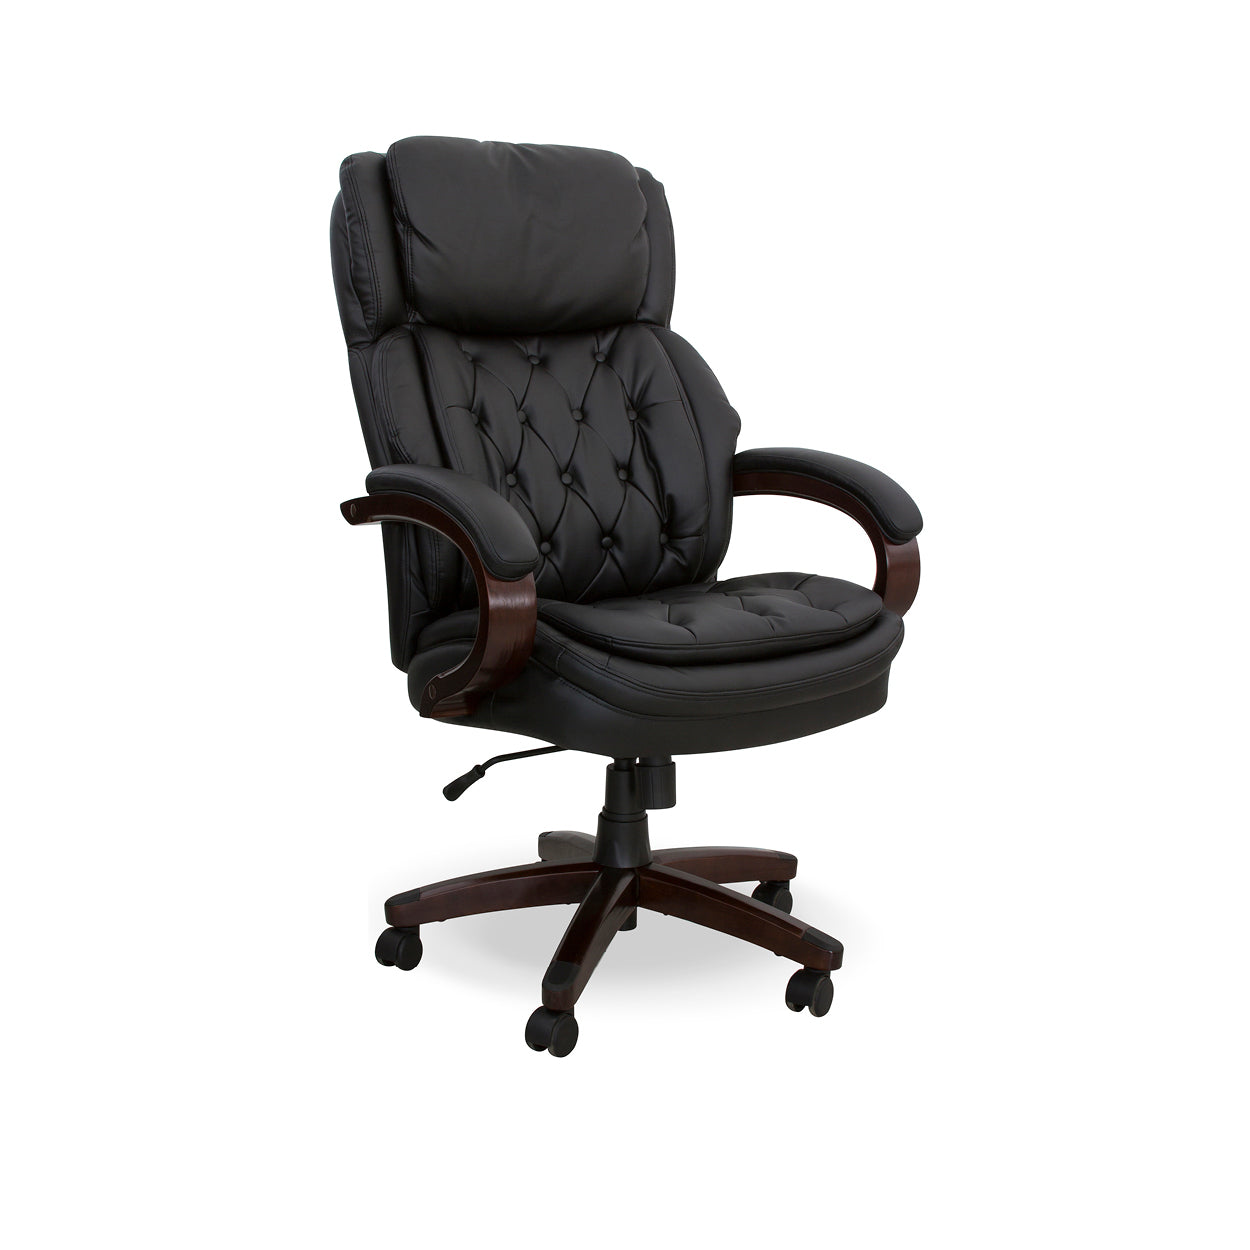 Hedcor President high back office chair